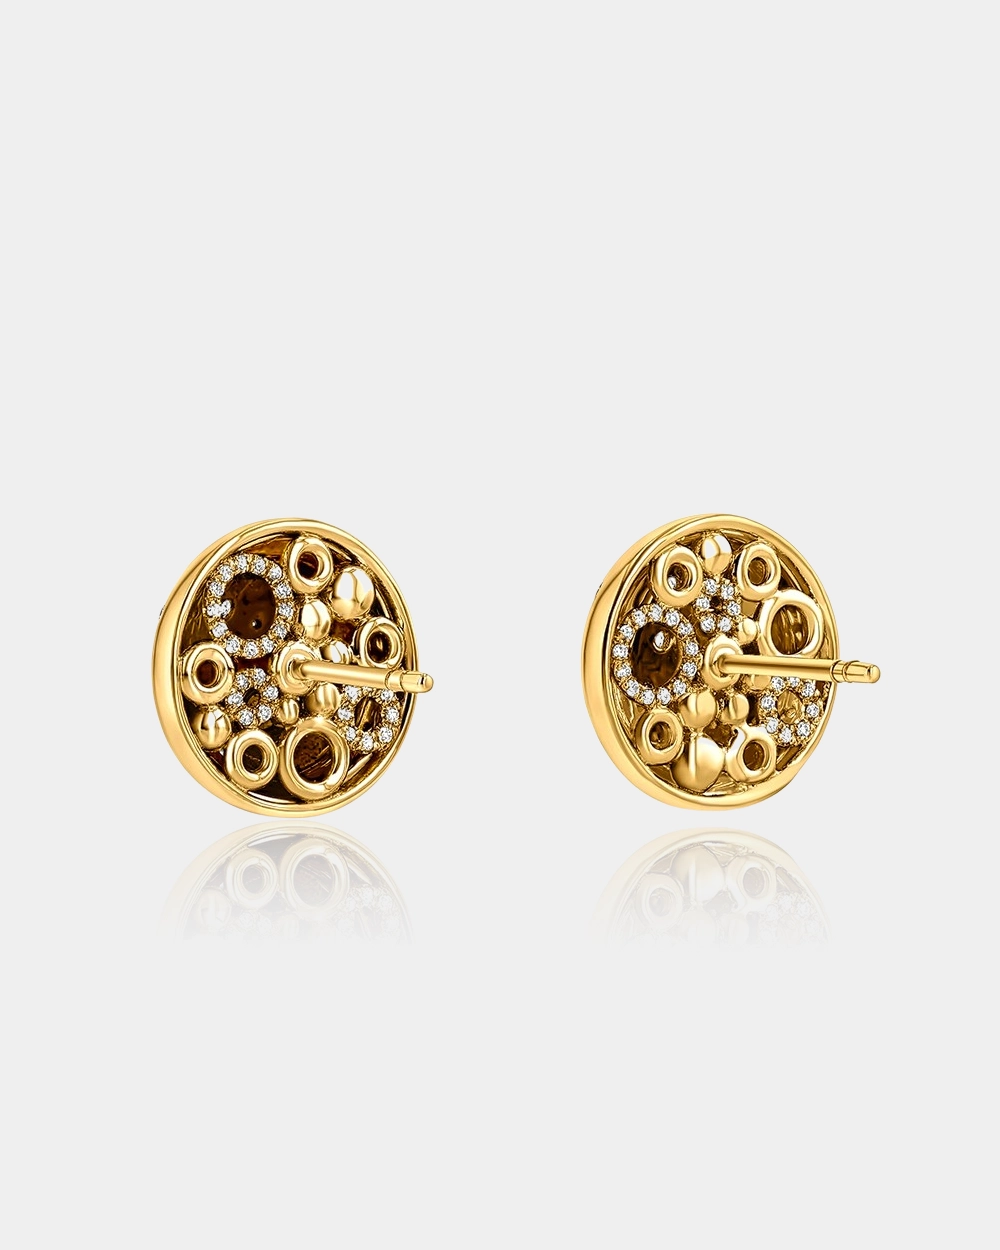 Golden Round Stud Earrings with colored stones | Round stud earrings, Stud  earrings, Stone color